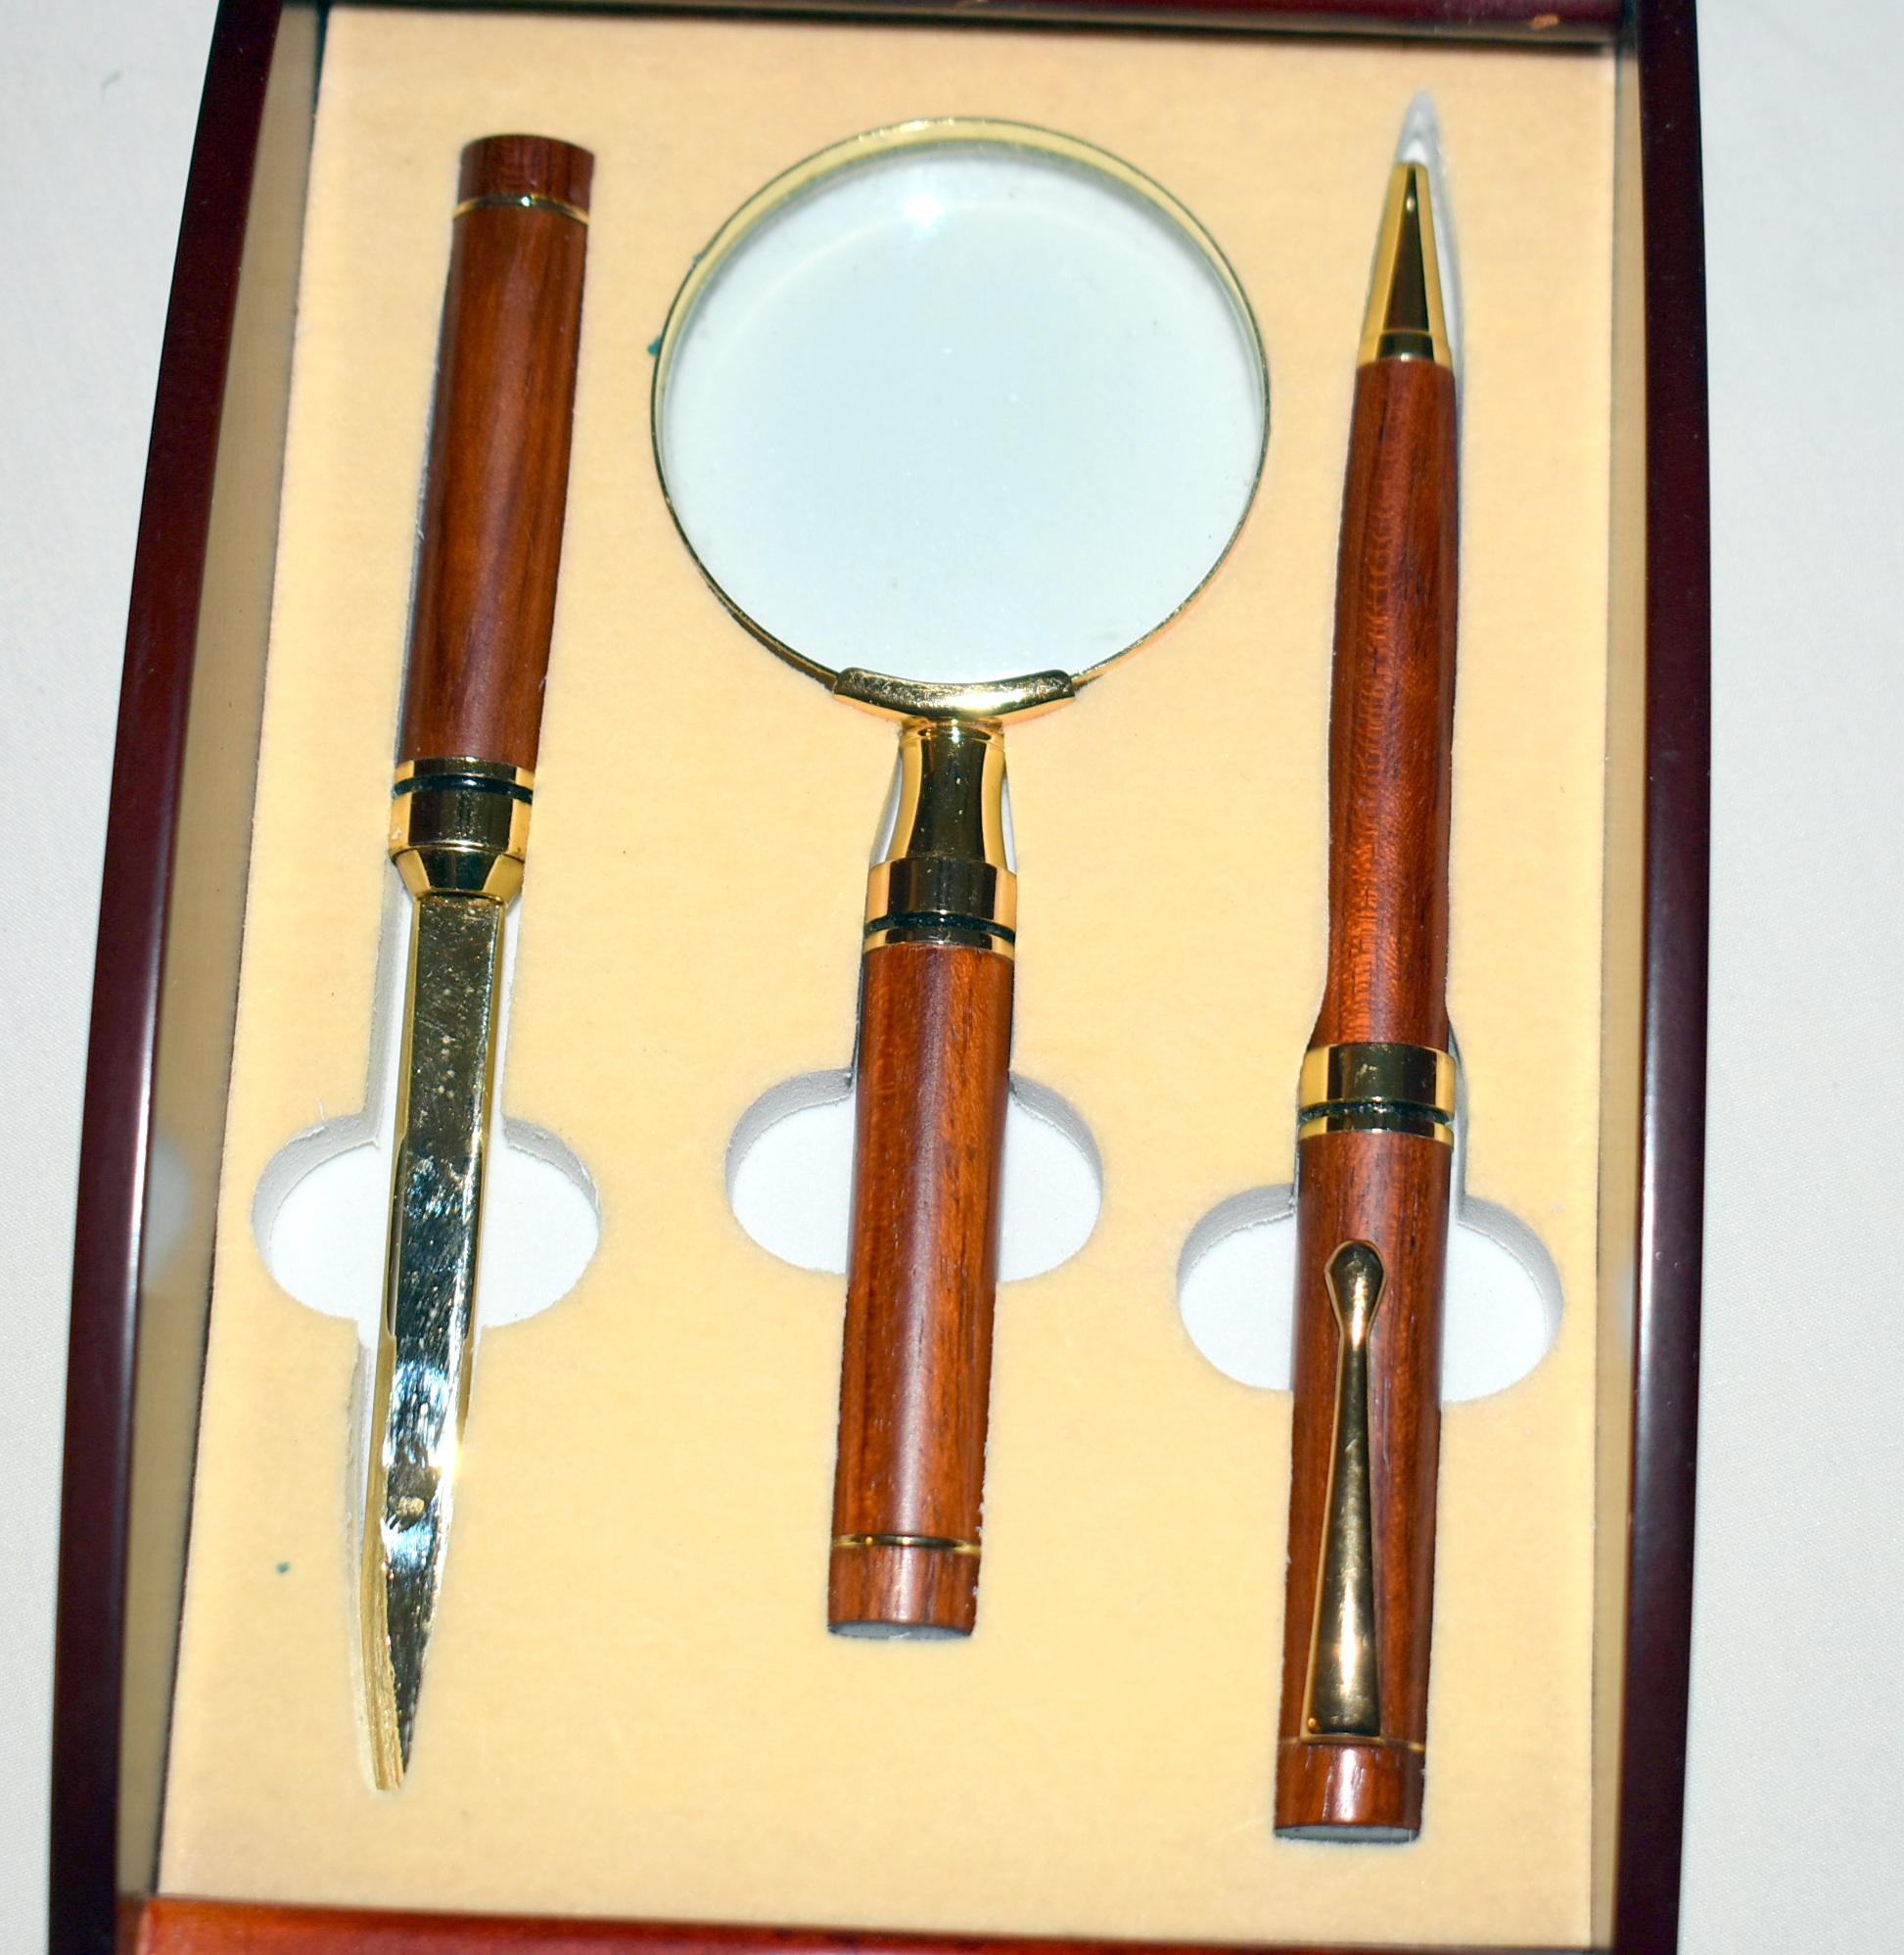 INK PEN SET IN DELUXE WOODEN CASE, INK PENS, DESK CADDY, AND MORE,